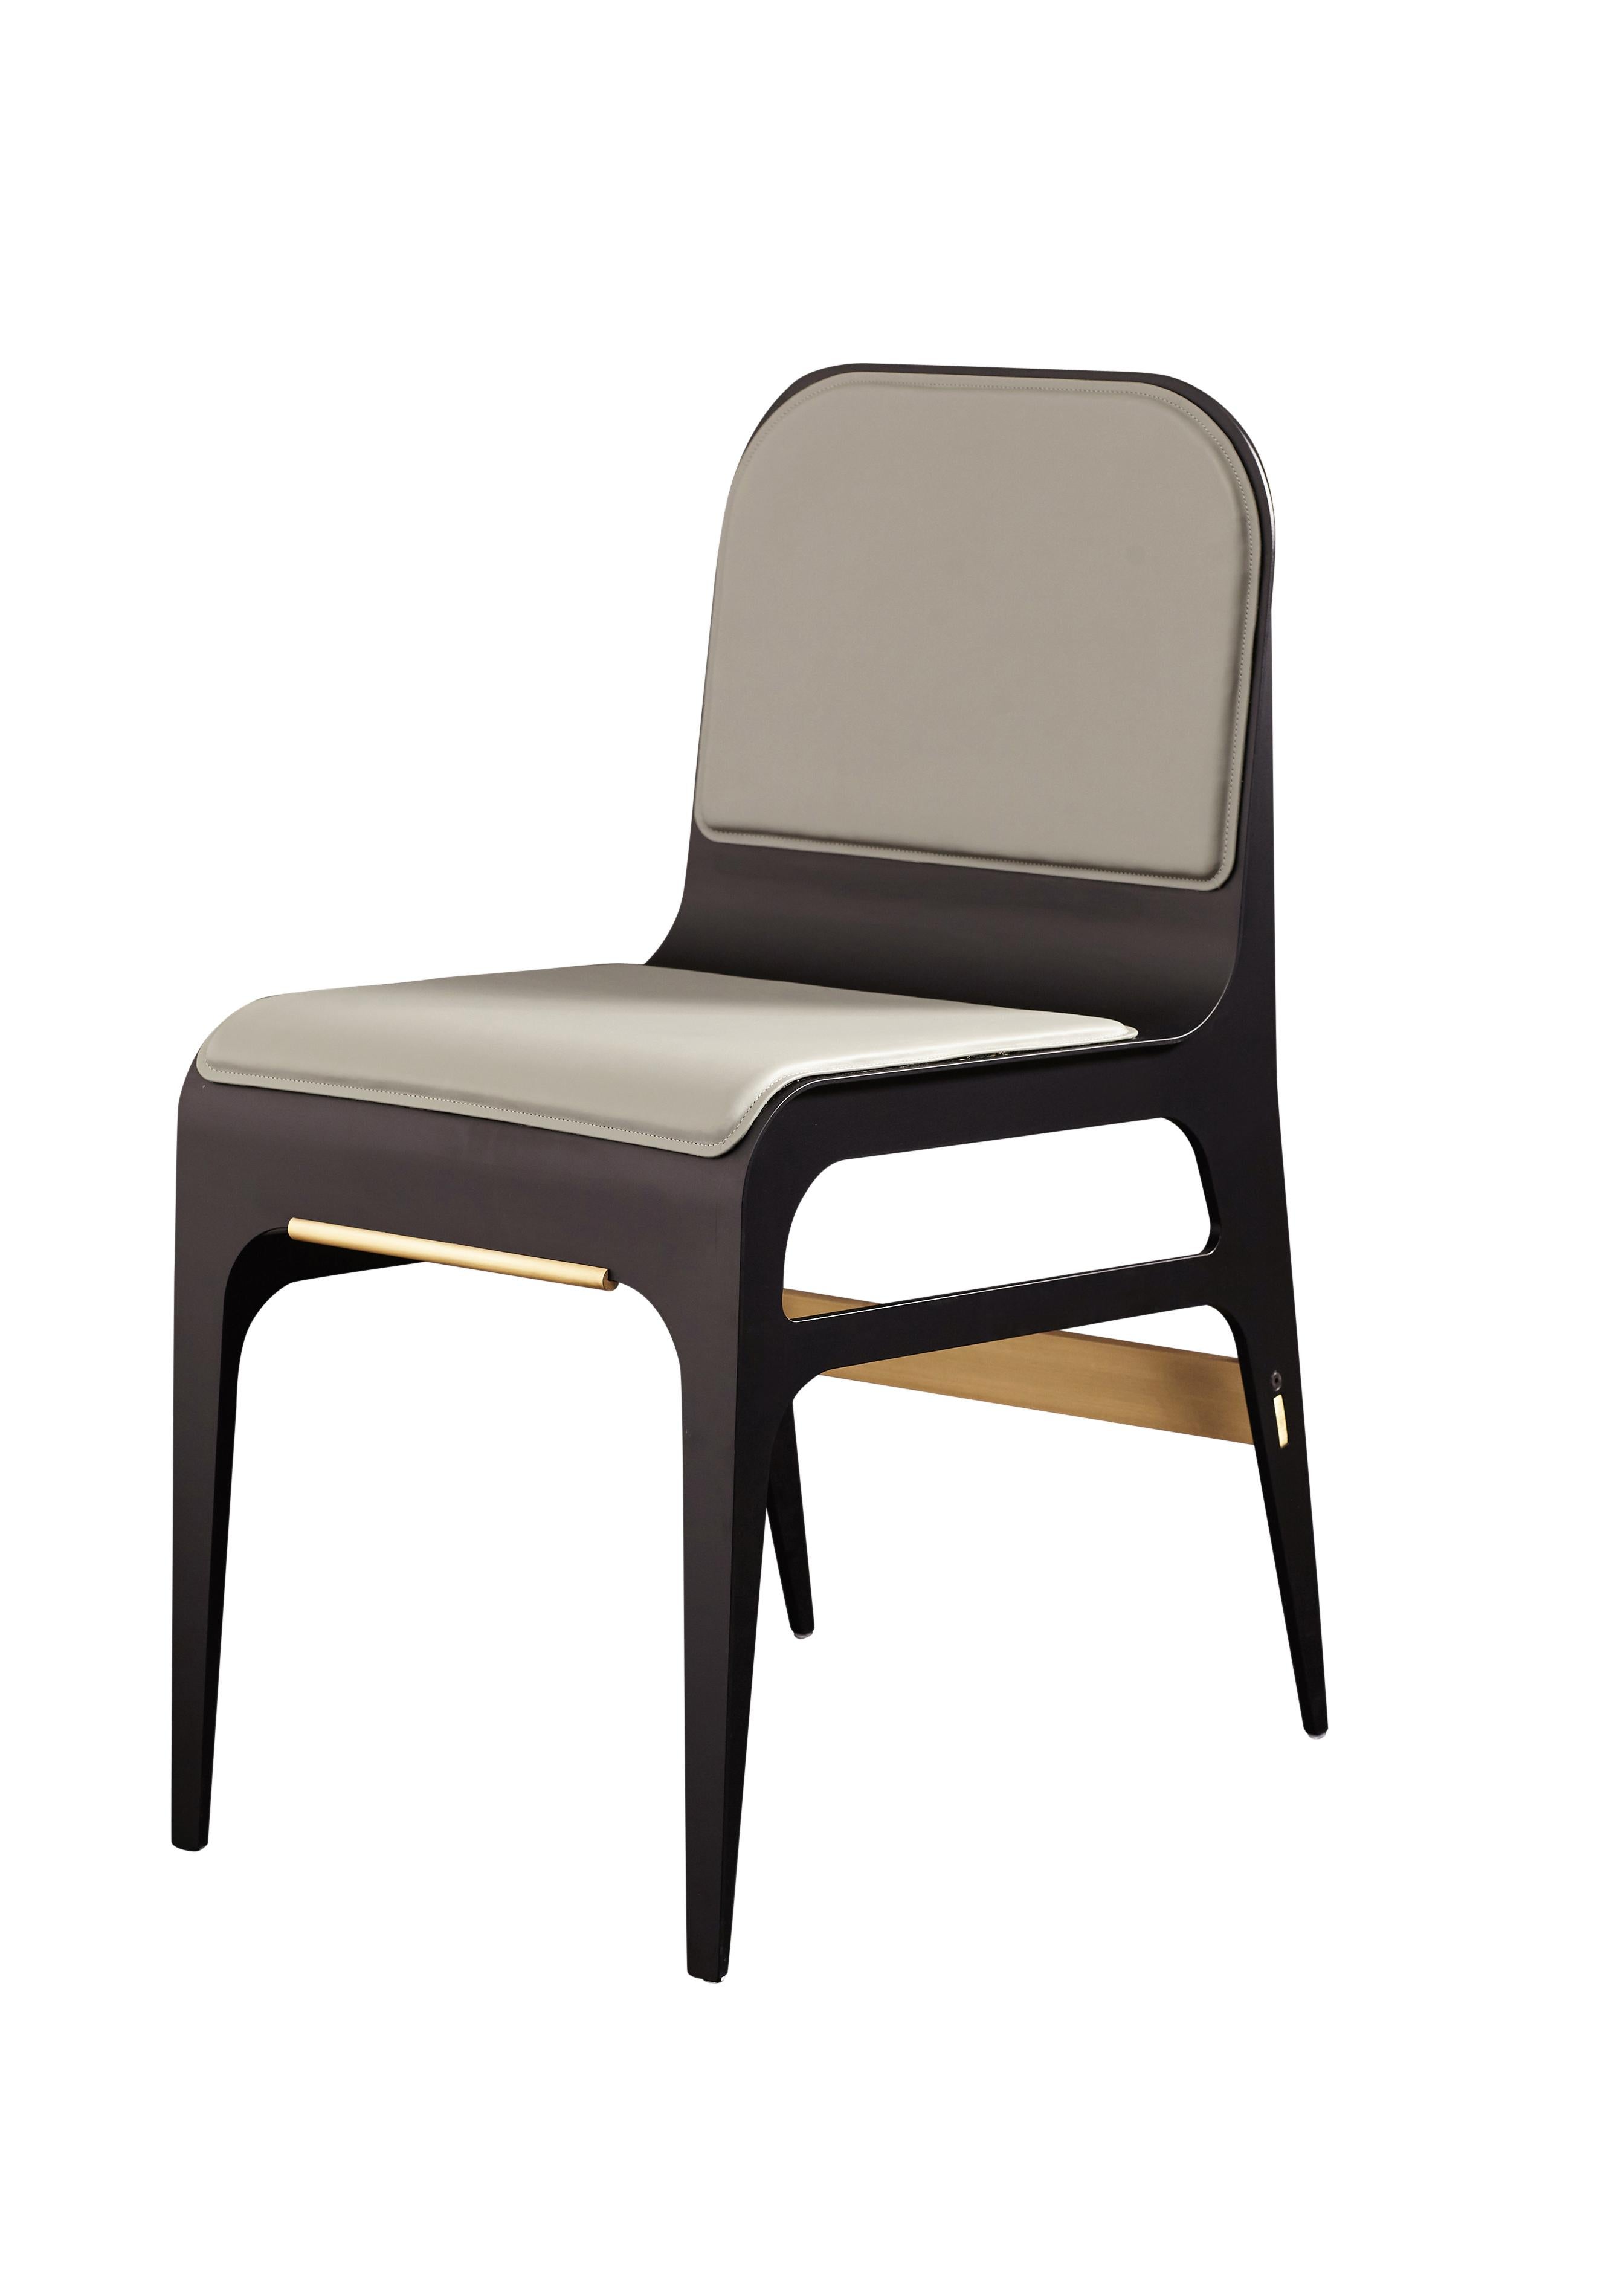 Gray (Slate Gray) Bardot Dining Chair with Leather Seat and Satin Brass Hardware by Gabriel Scott